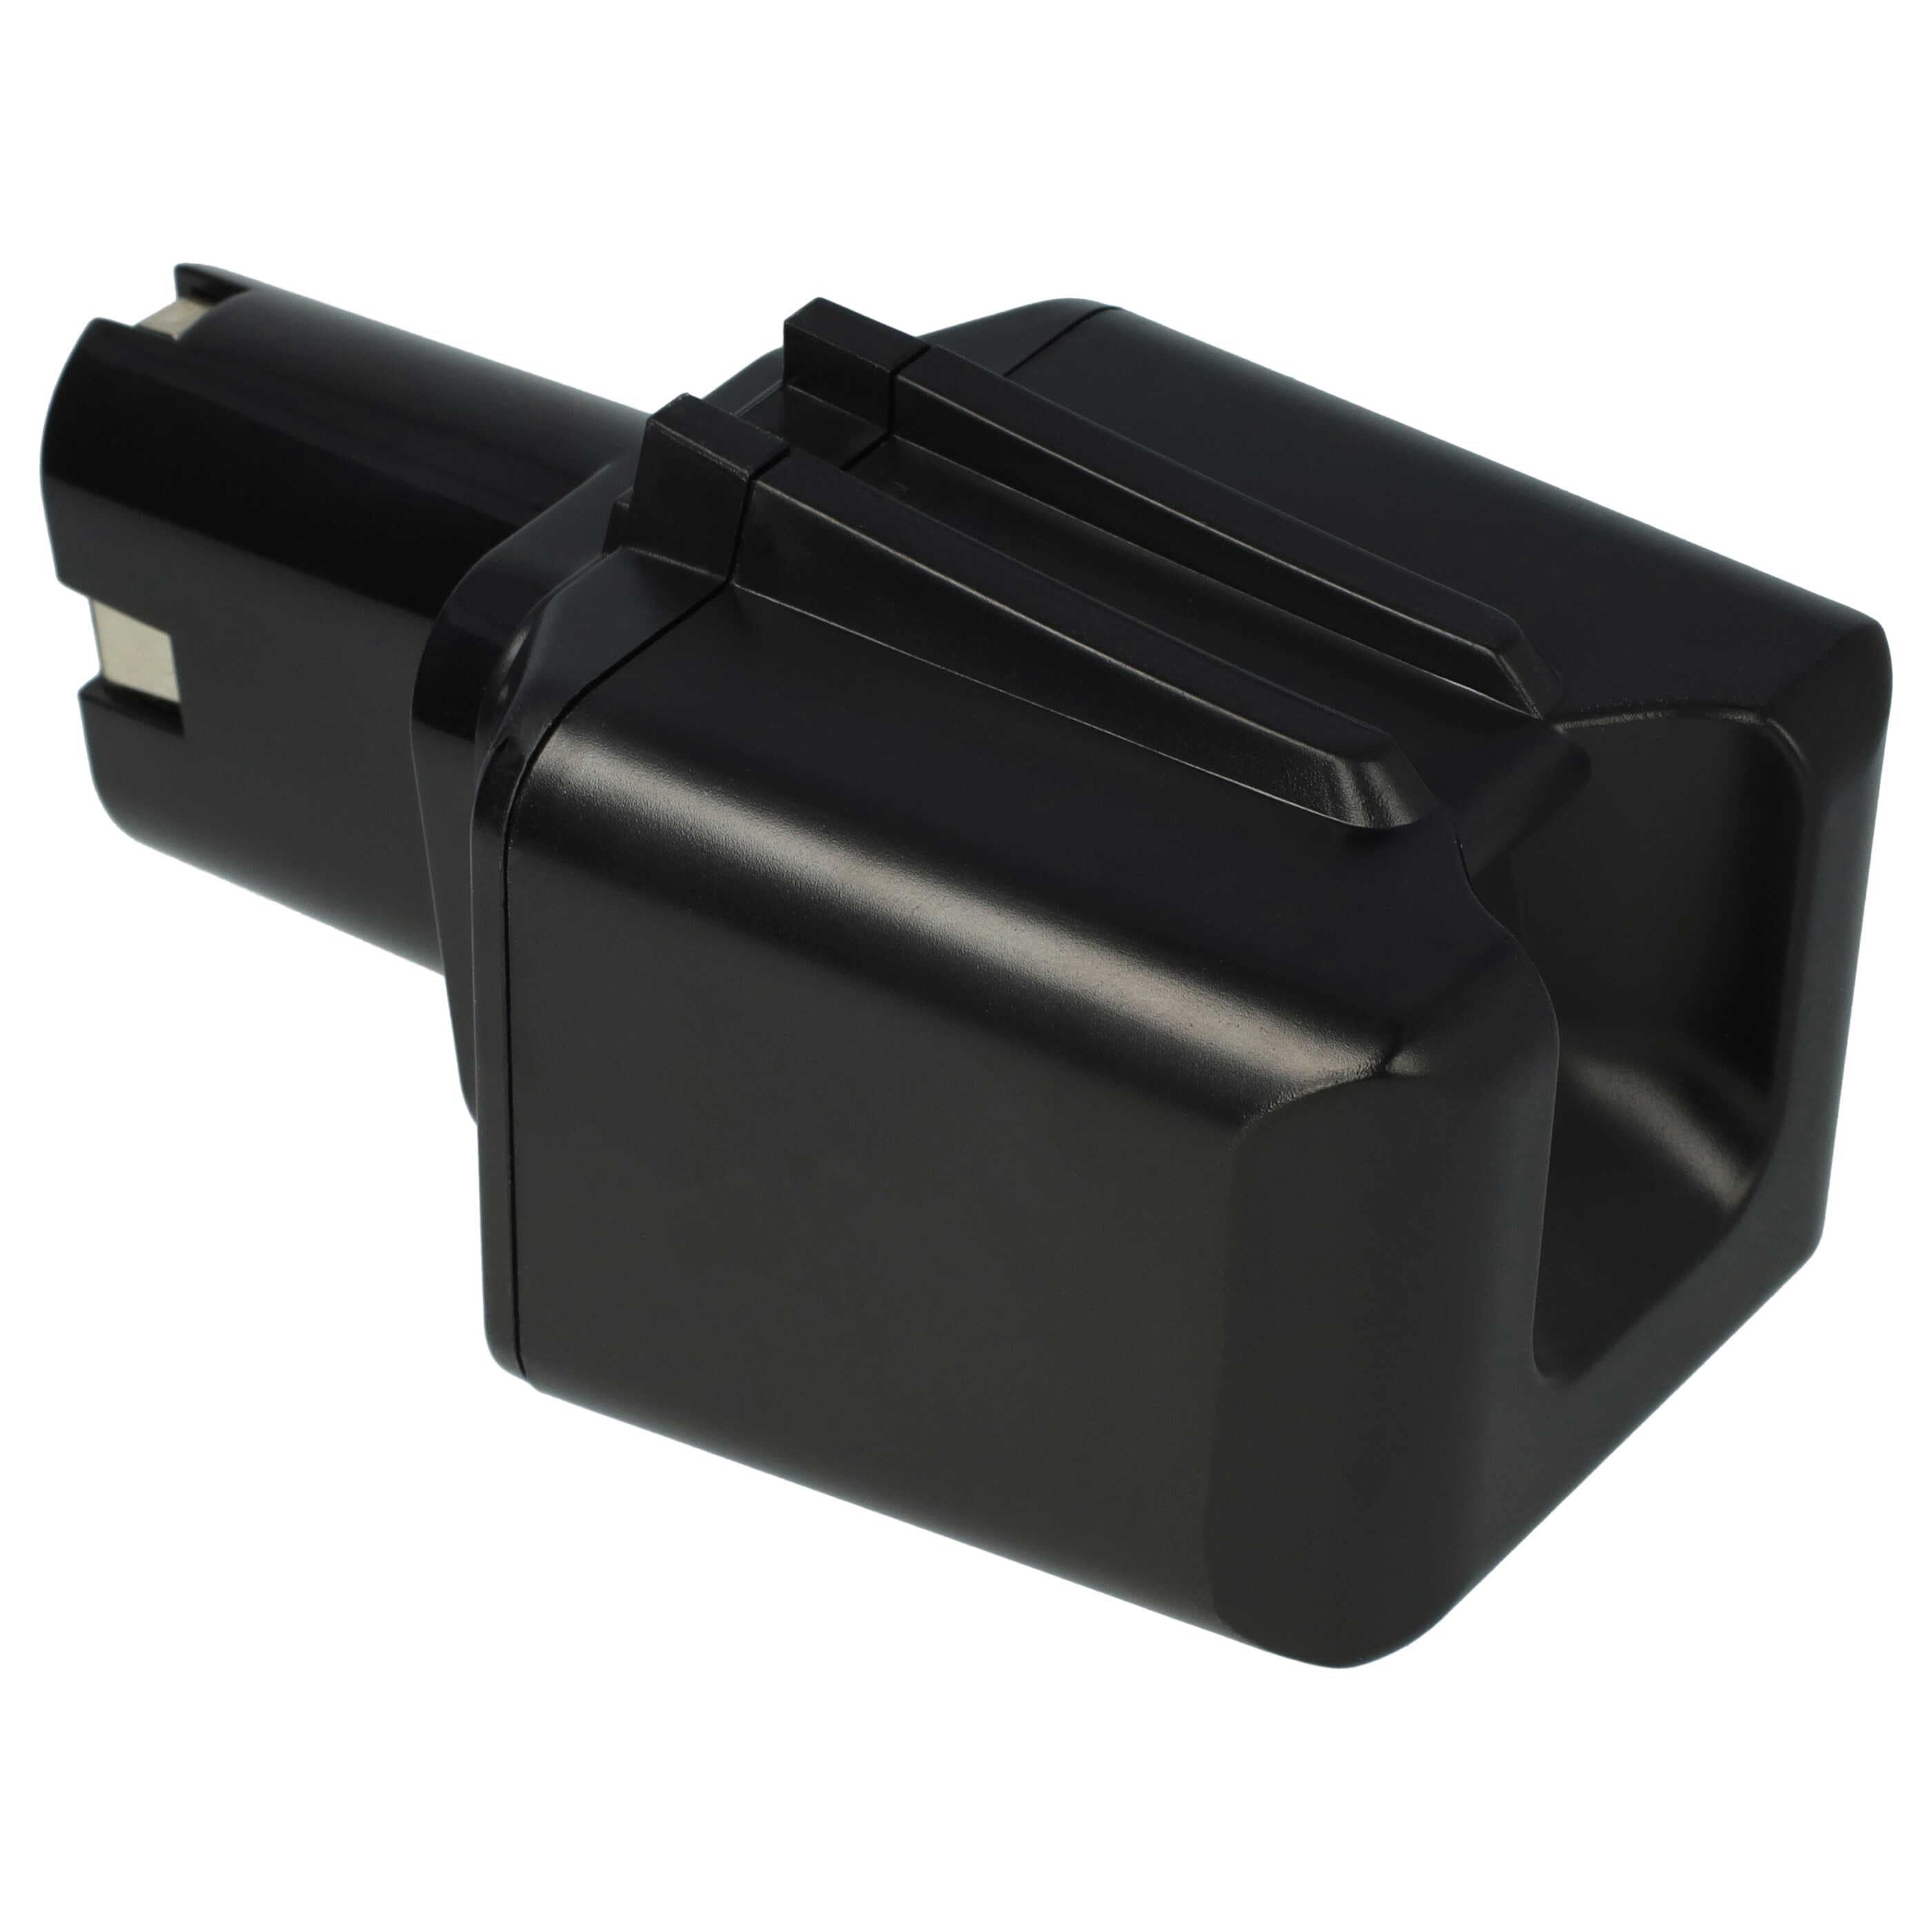 Electric Power Tool Battery Replaces Bosch 2607300002, 26073000002, 2 607 3000 002 - 4500 mAh, 9.6 V, NiMH